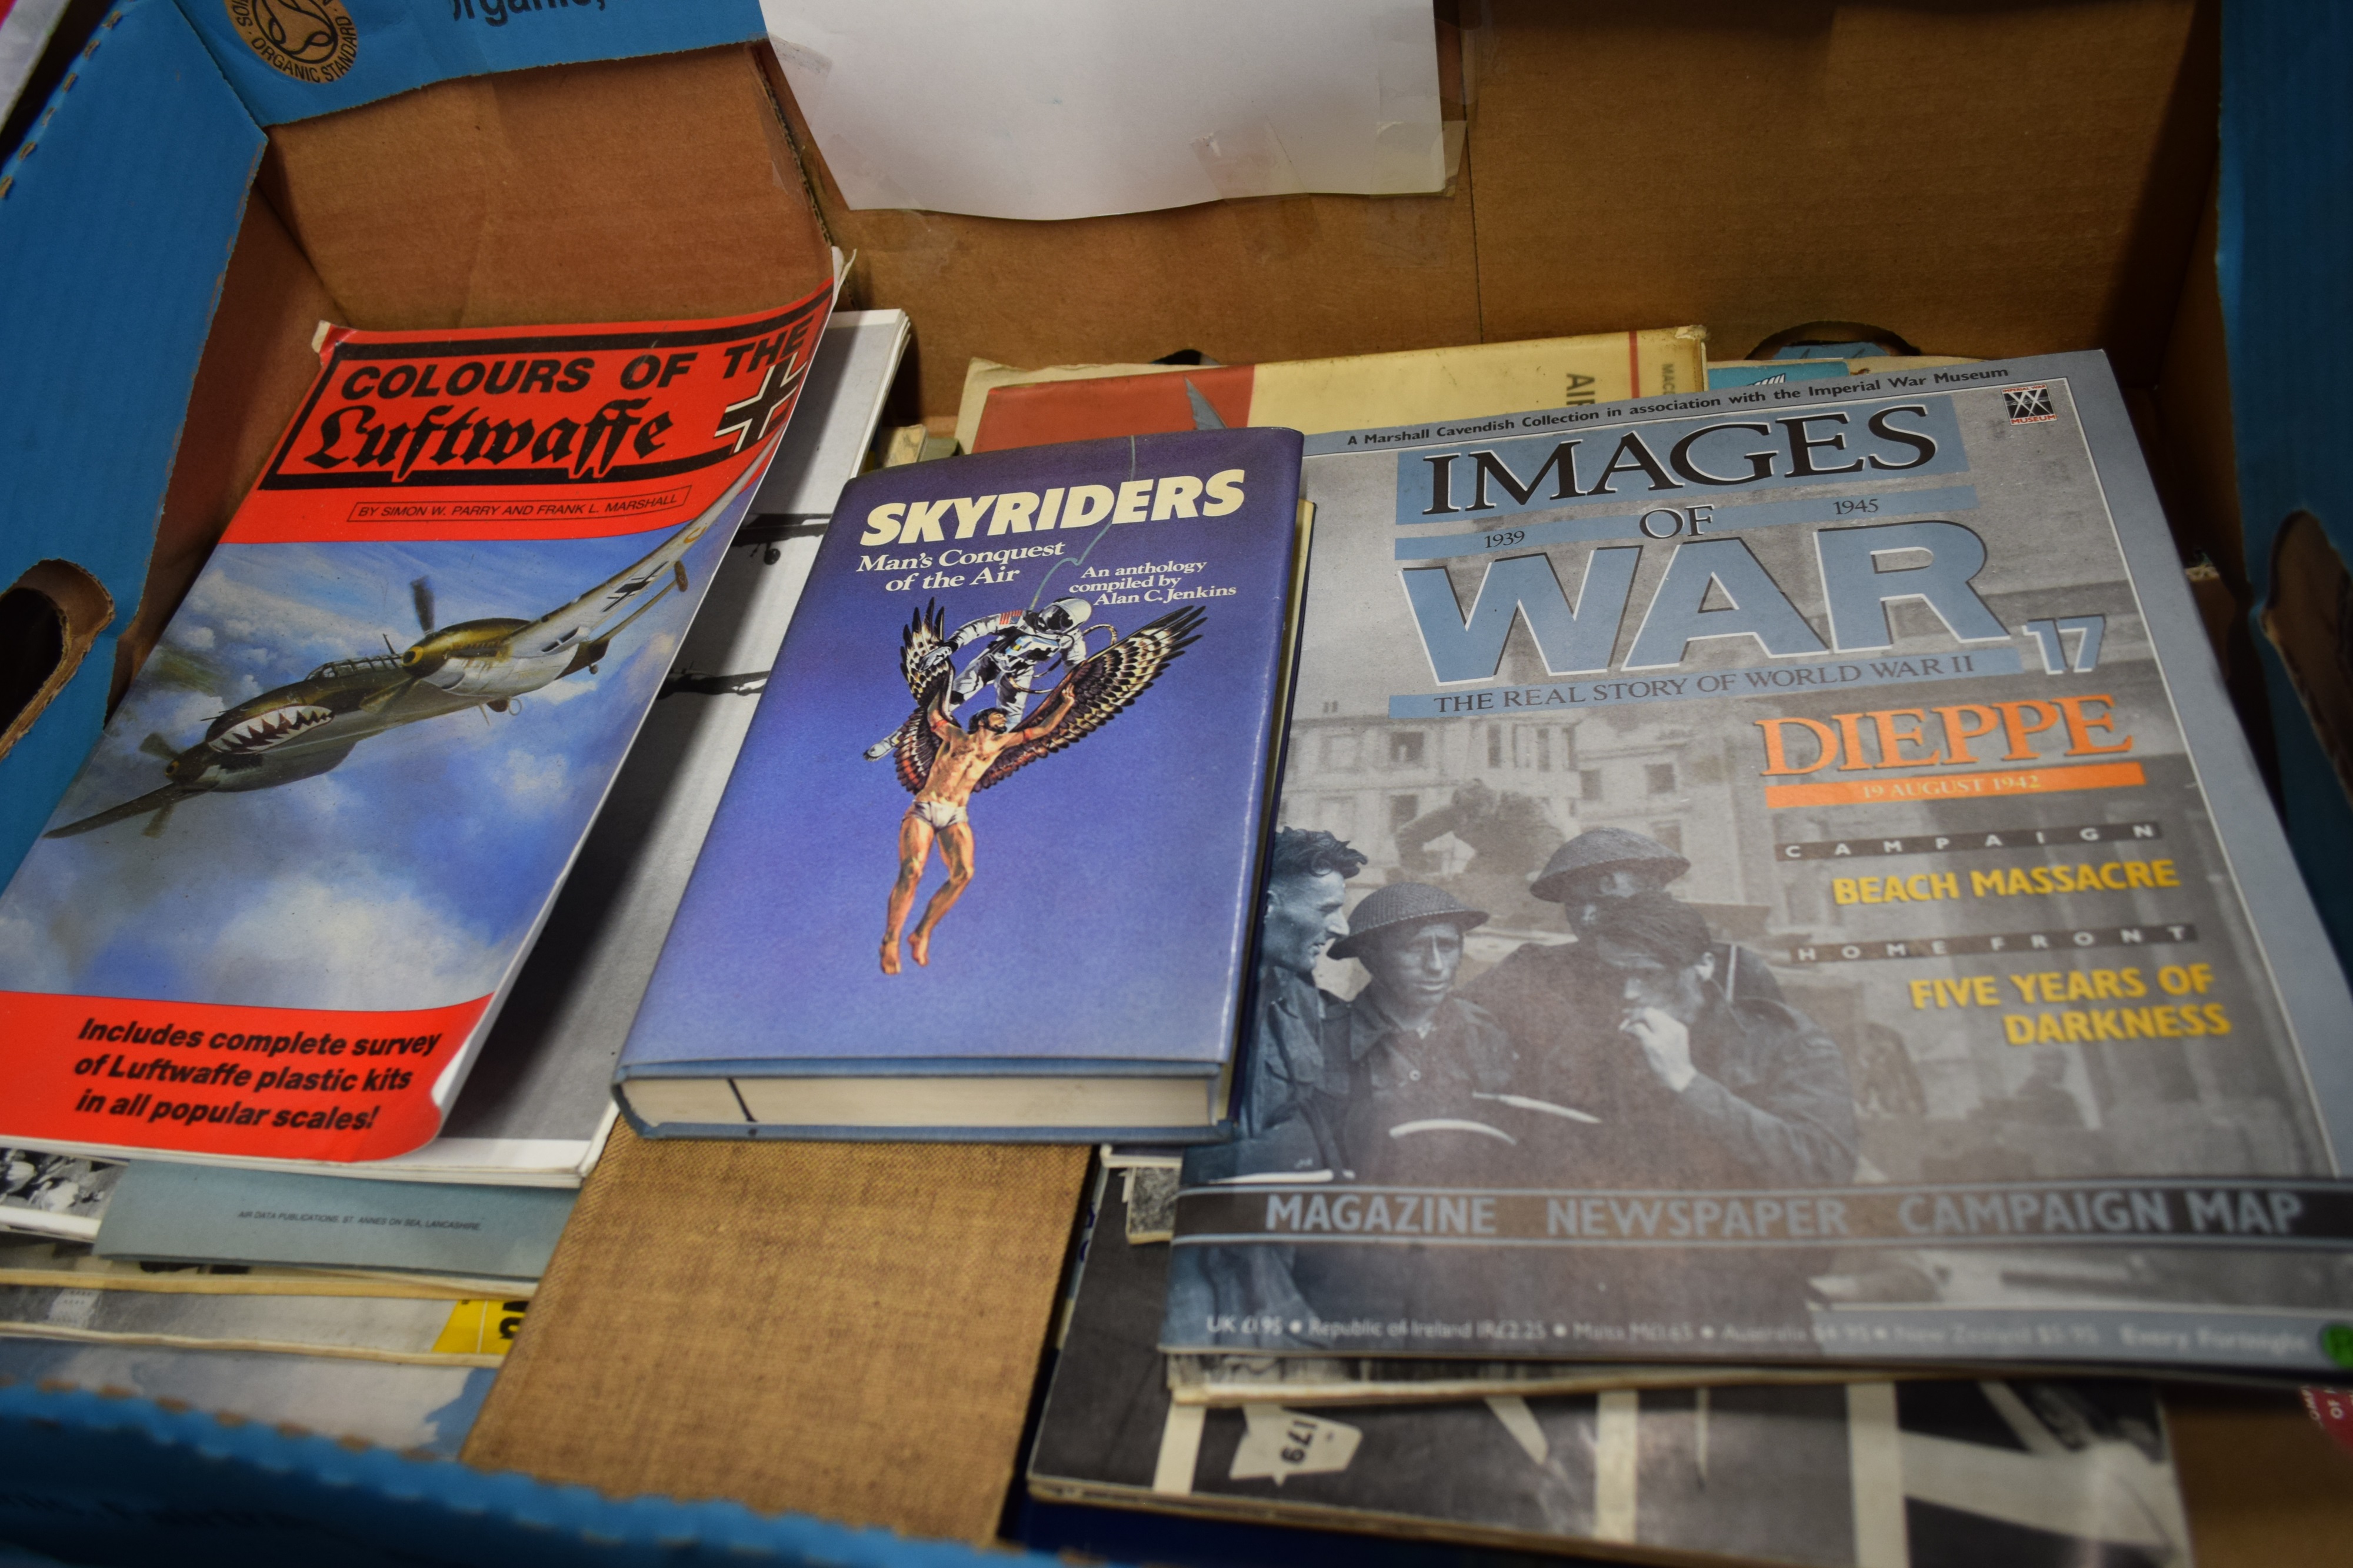 Approx 30 aviation and aircraft related items, magazines, books etc [our ref: ]